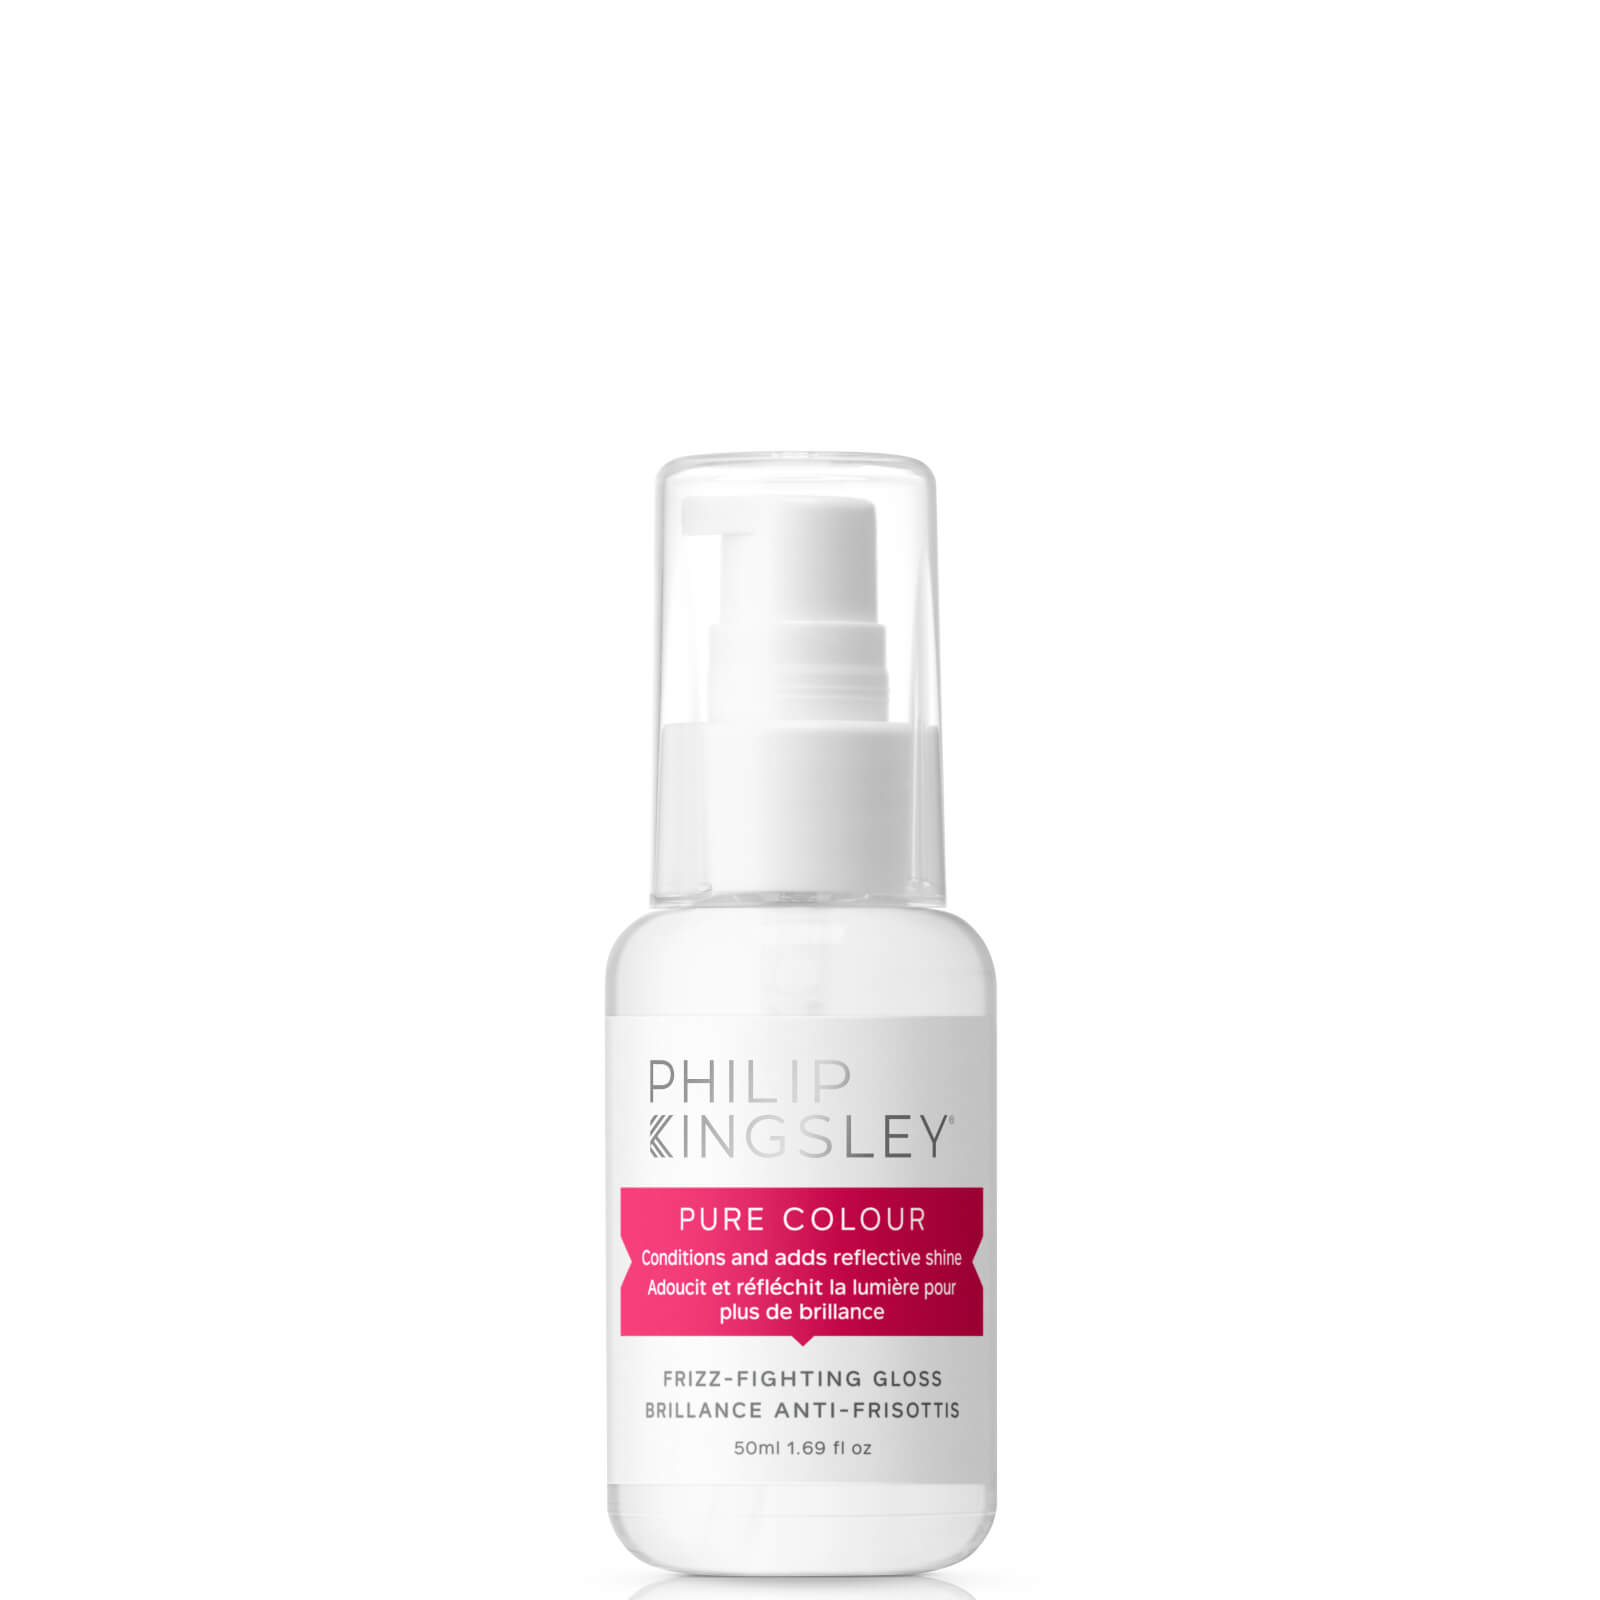 PHILIP KINGSLEY PURE COLOUR FRIZZ FIGHTING GLOSS 50ML,PHI866